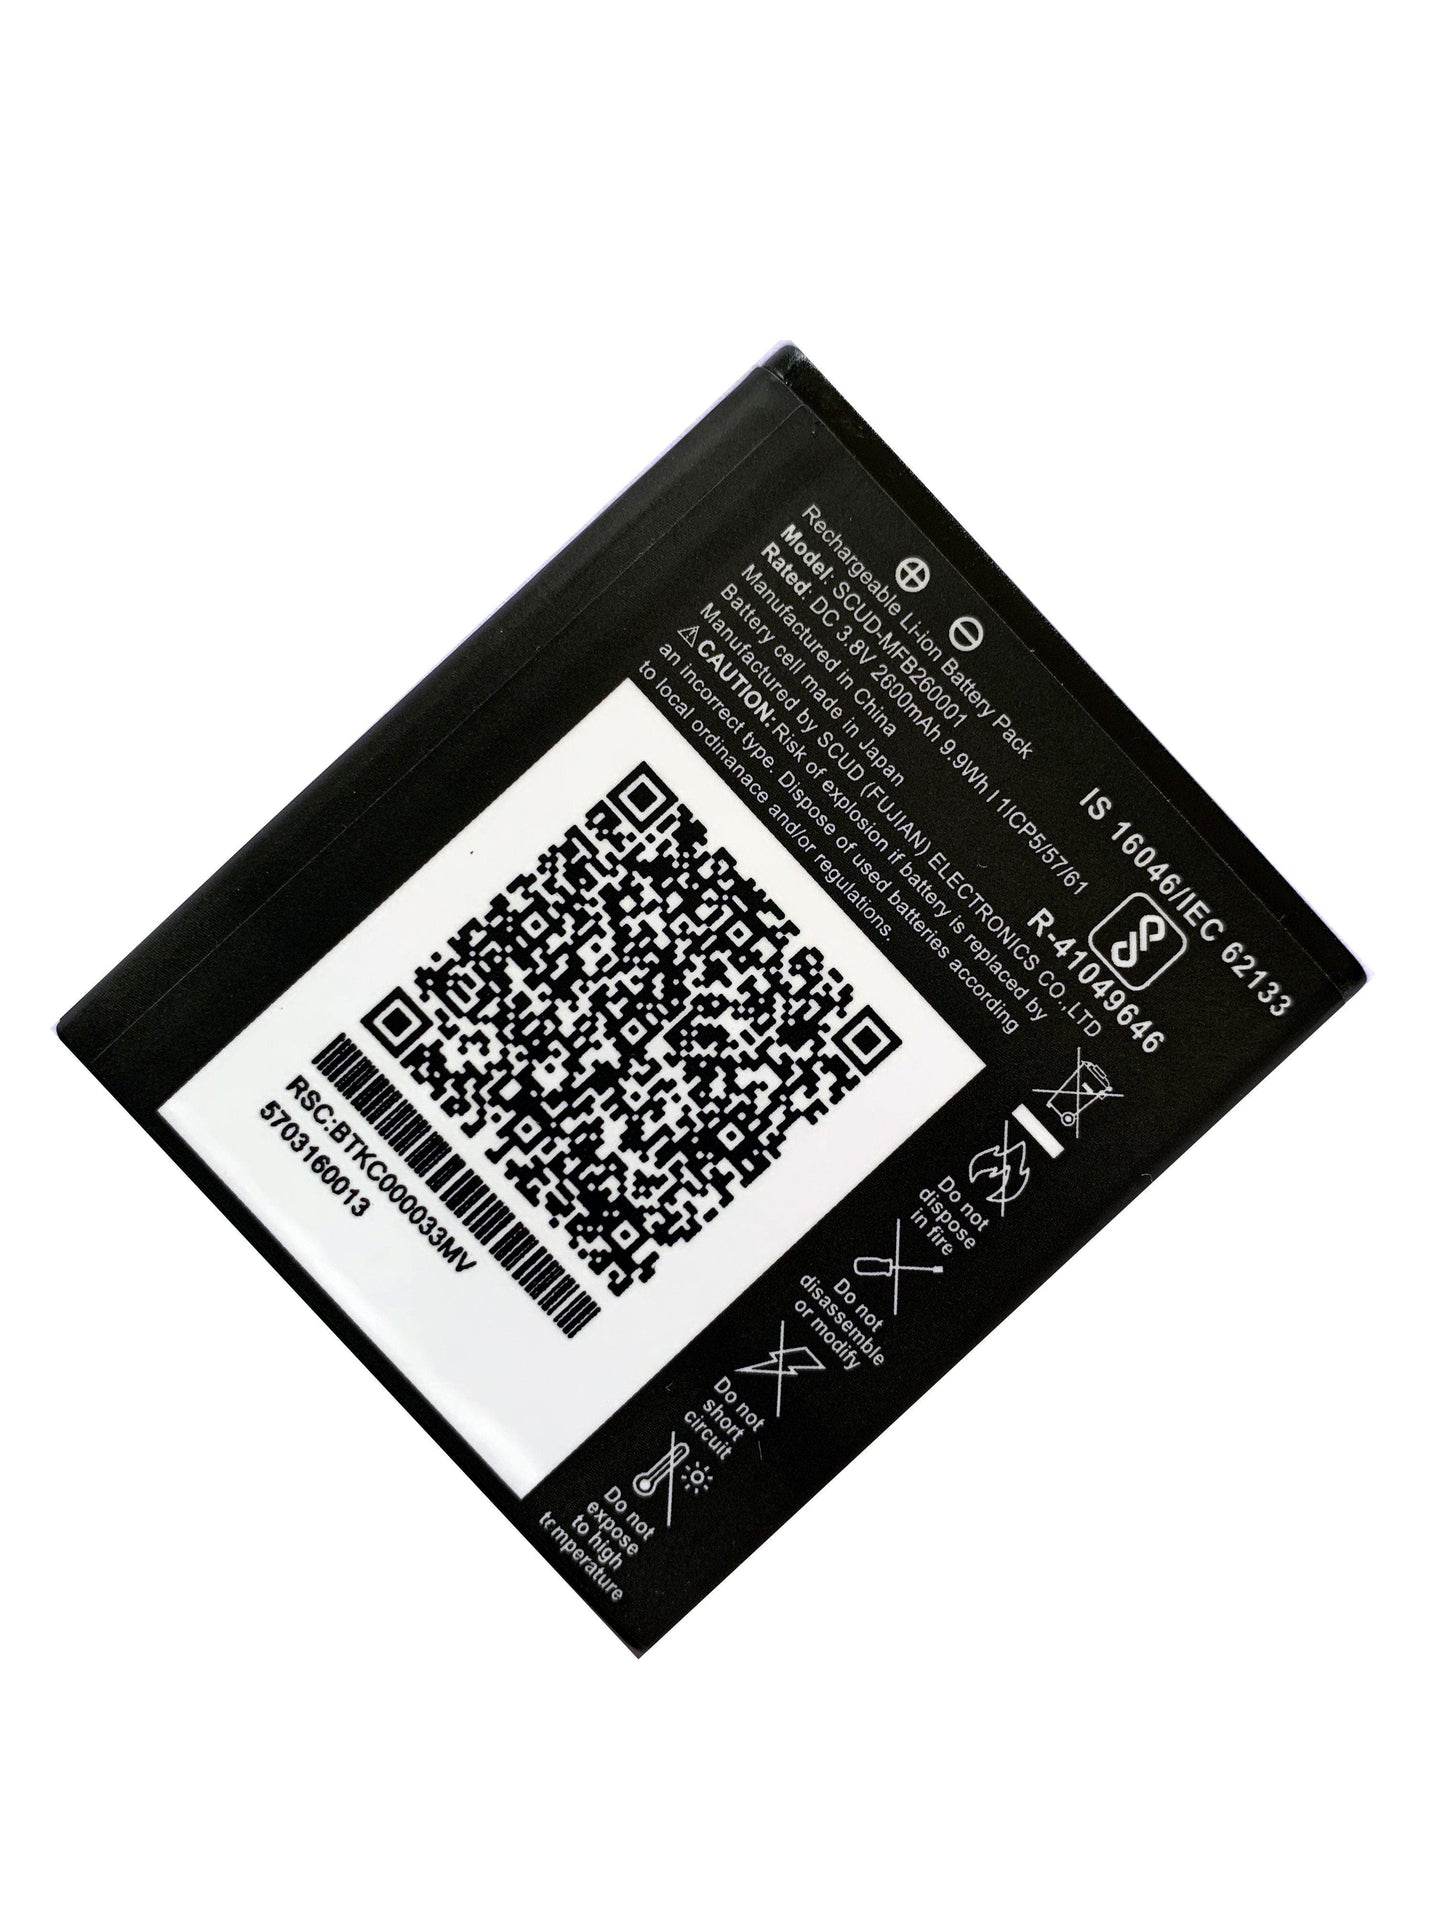 Battery for Reliance Jio Wi-Fi JMR540 Wireless Data Card SCUD-MFB260001 - Indclues